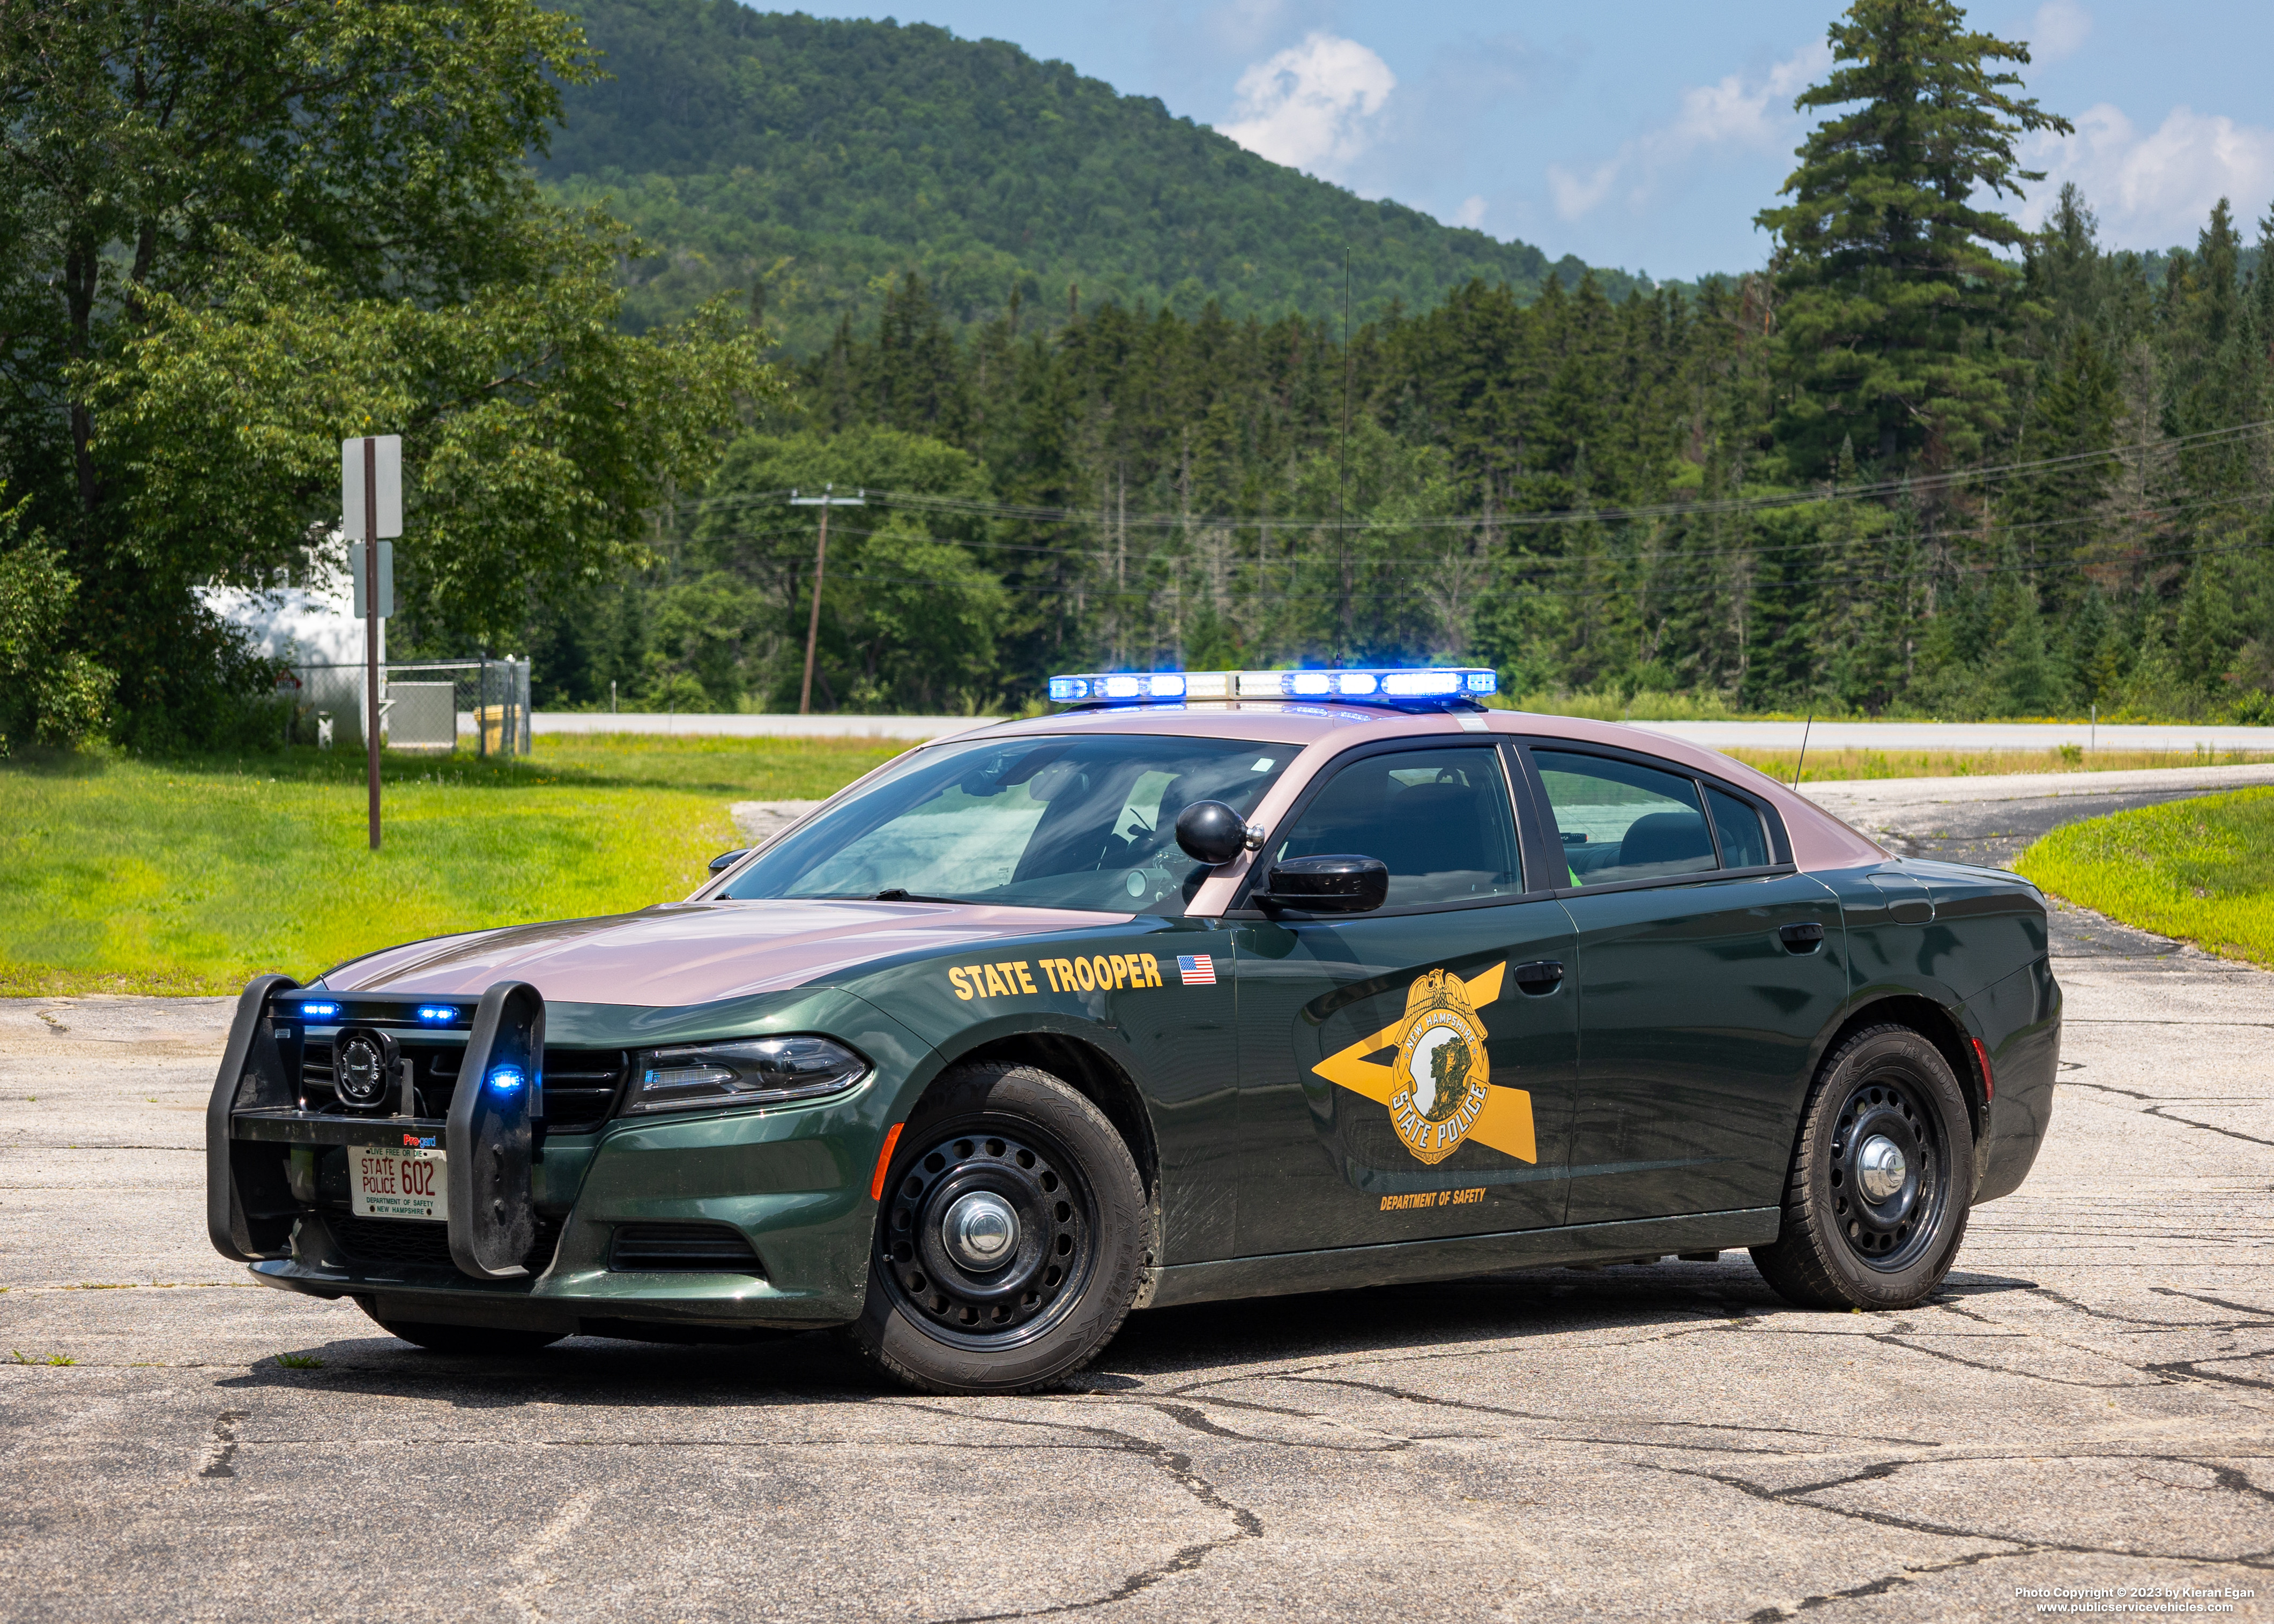 A photo  of New Hampshire State Police
            Cruiser 602, a 2020 Dodge Charger             taken by Kieran Egan